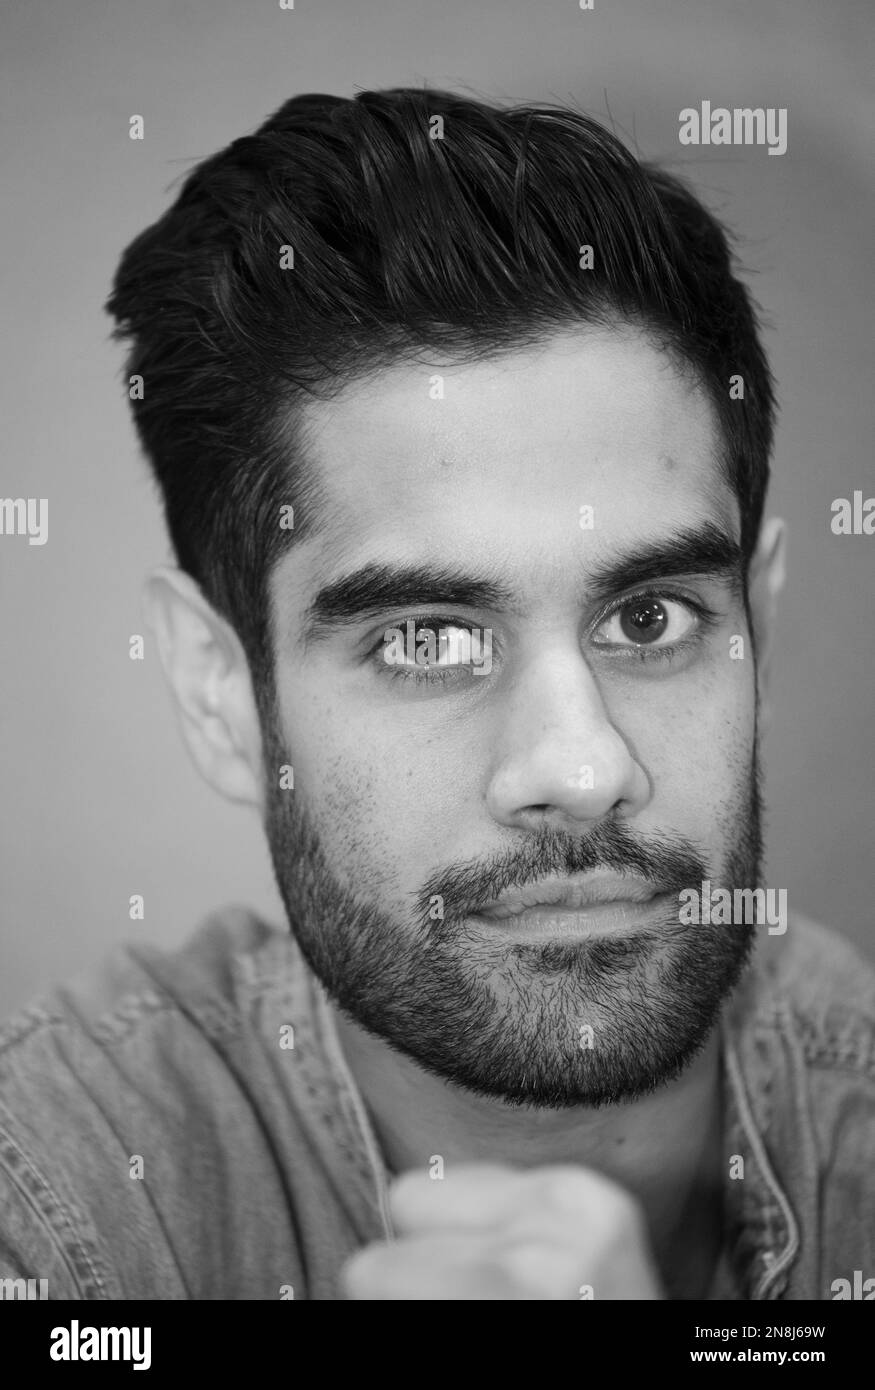 Portrait of British actor Sacha Dhawan, attending the 2017 London Film Comic Con as a guest signer, at the Olympia London exhibition and event venue. Stock Photo